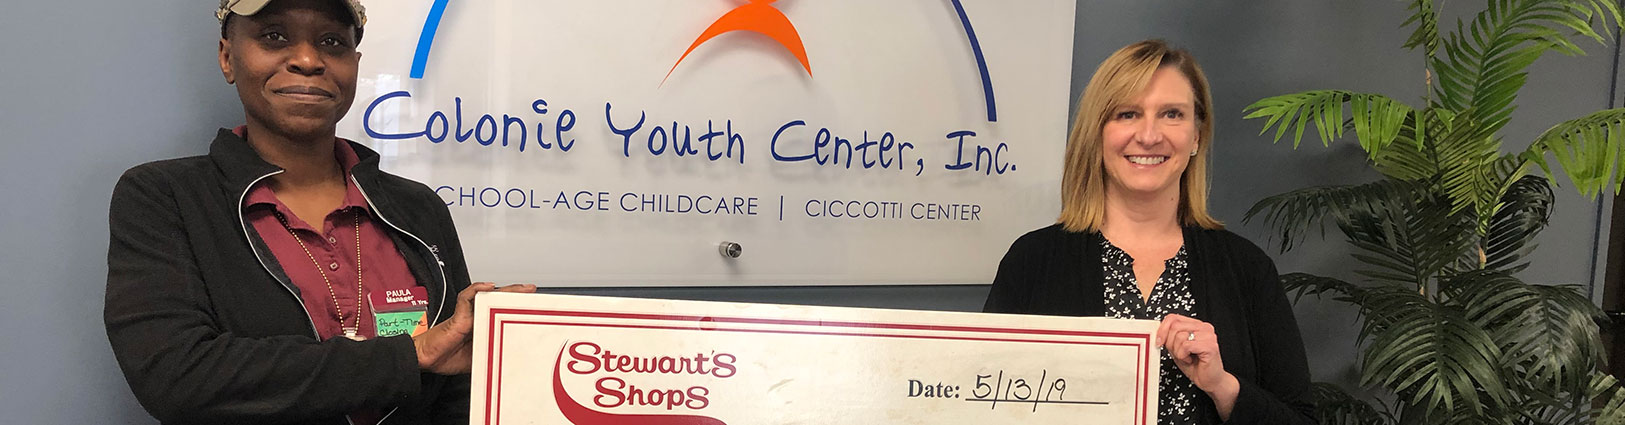 Women hold an oversized donation check from Stewart's Shops to Colonie Youth Center